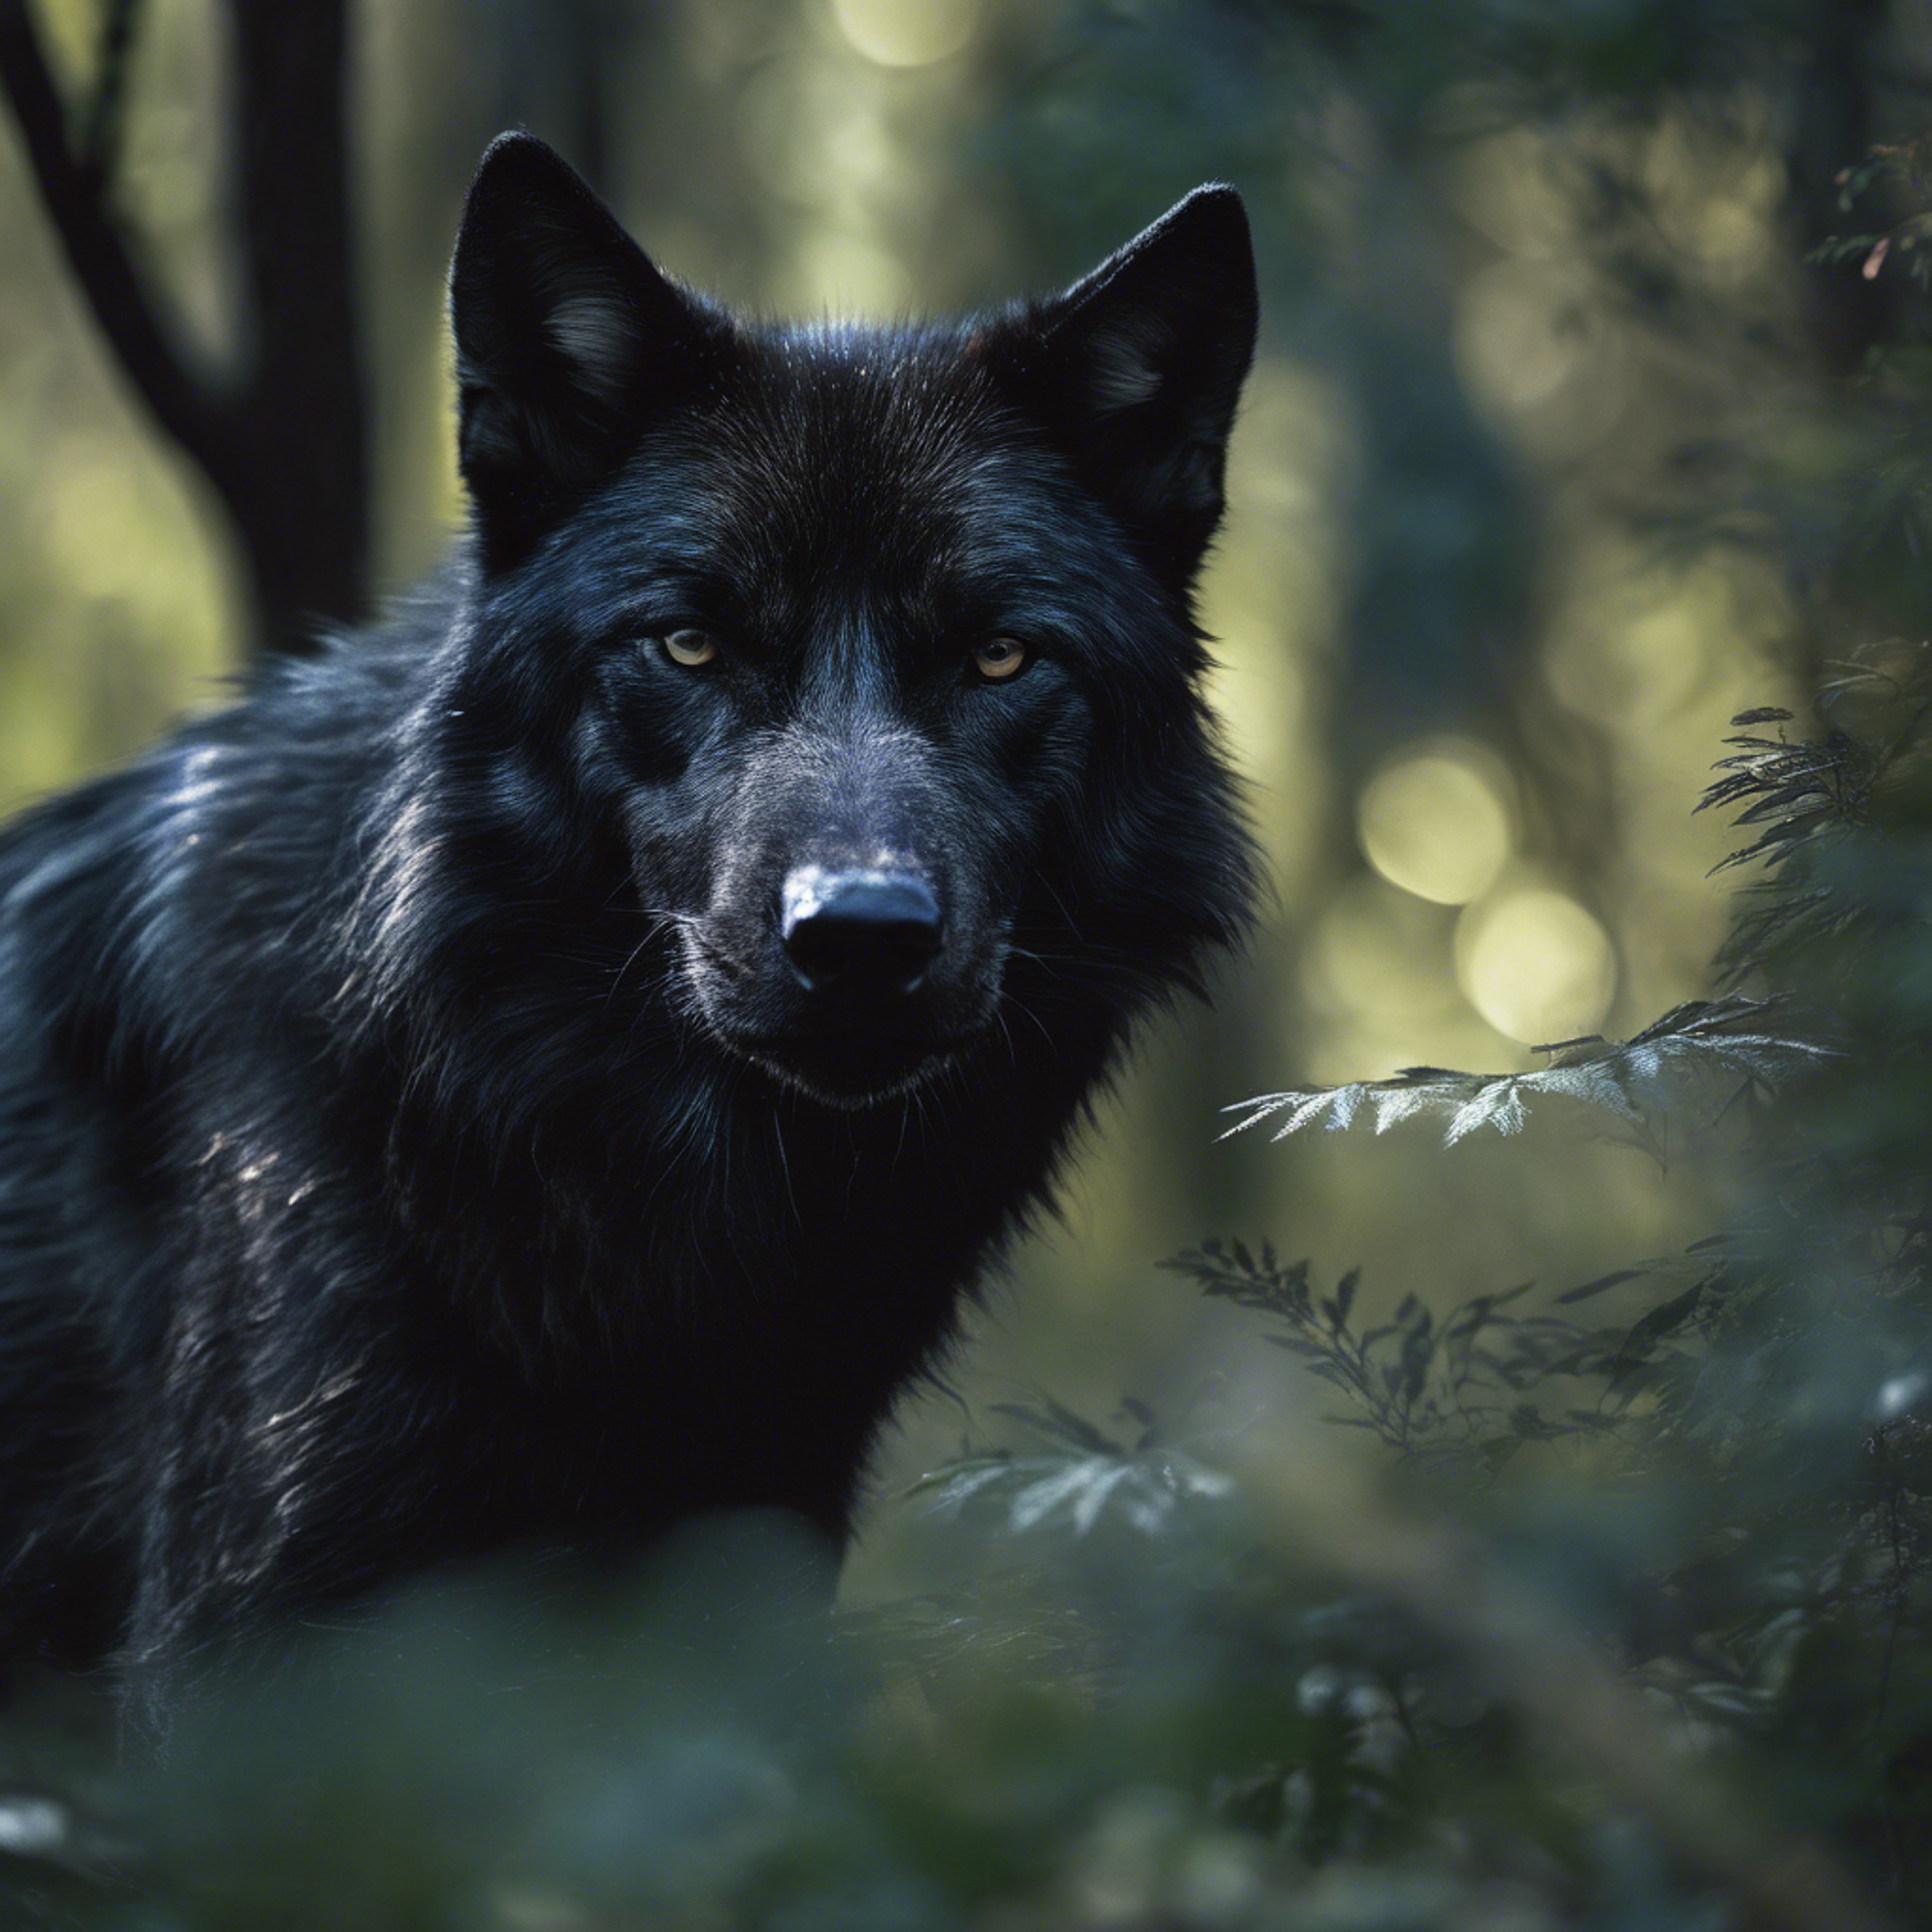 A black wolf camouflaged in the shadowy shades of a dense forest, ready to pounce on prey. Tapeta[8e2c23357bd04da18408]